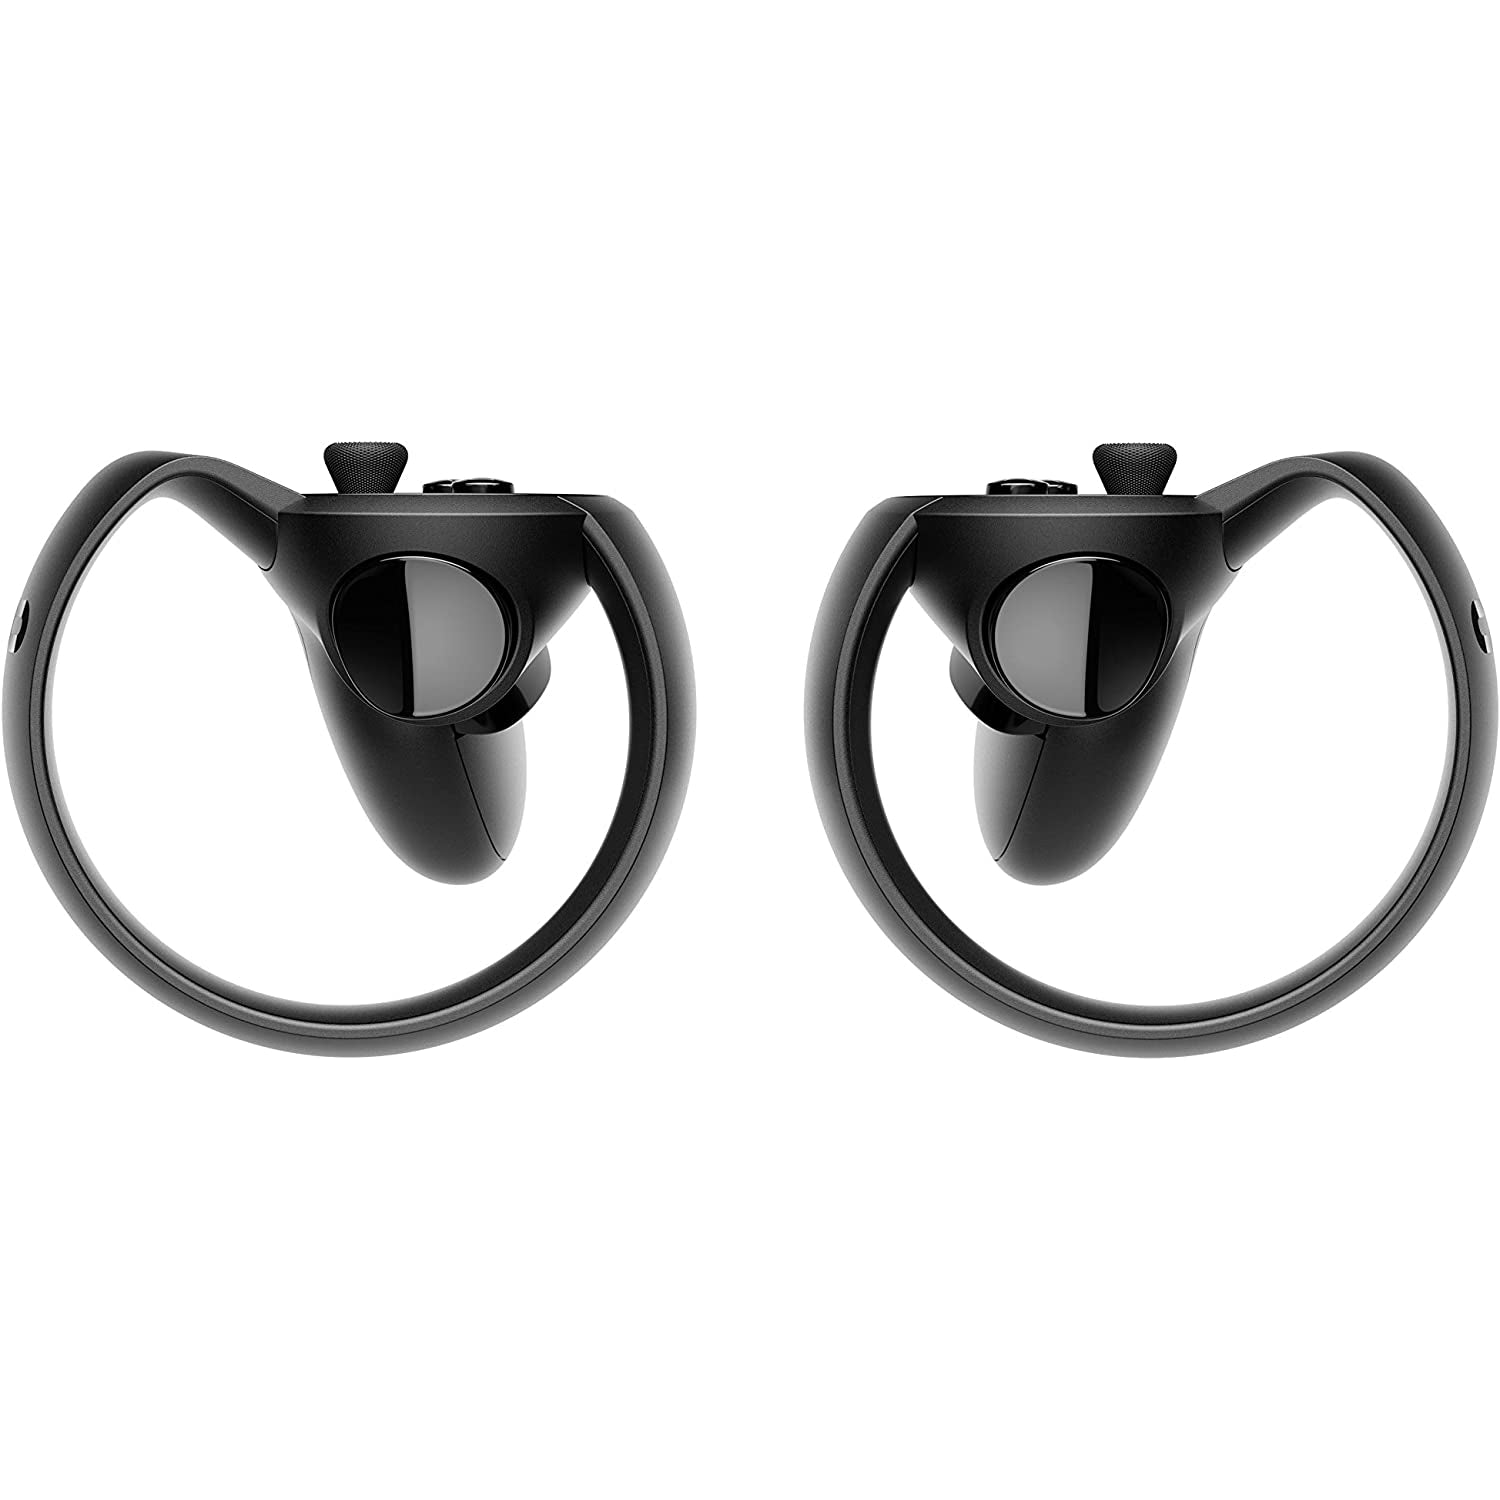 Oculus Rift Touch Controllers - Black